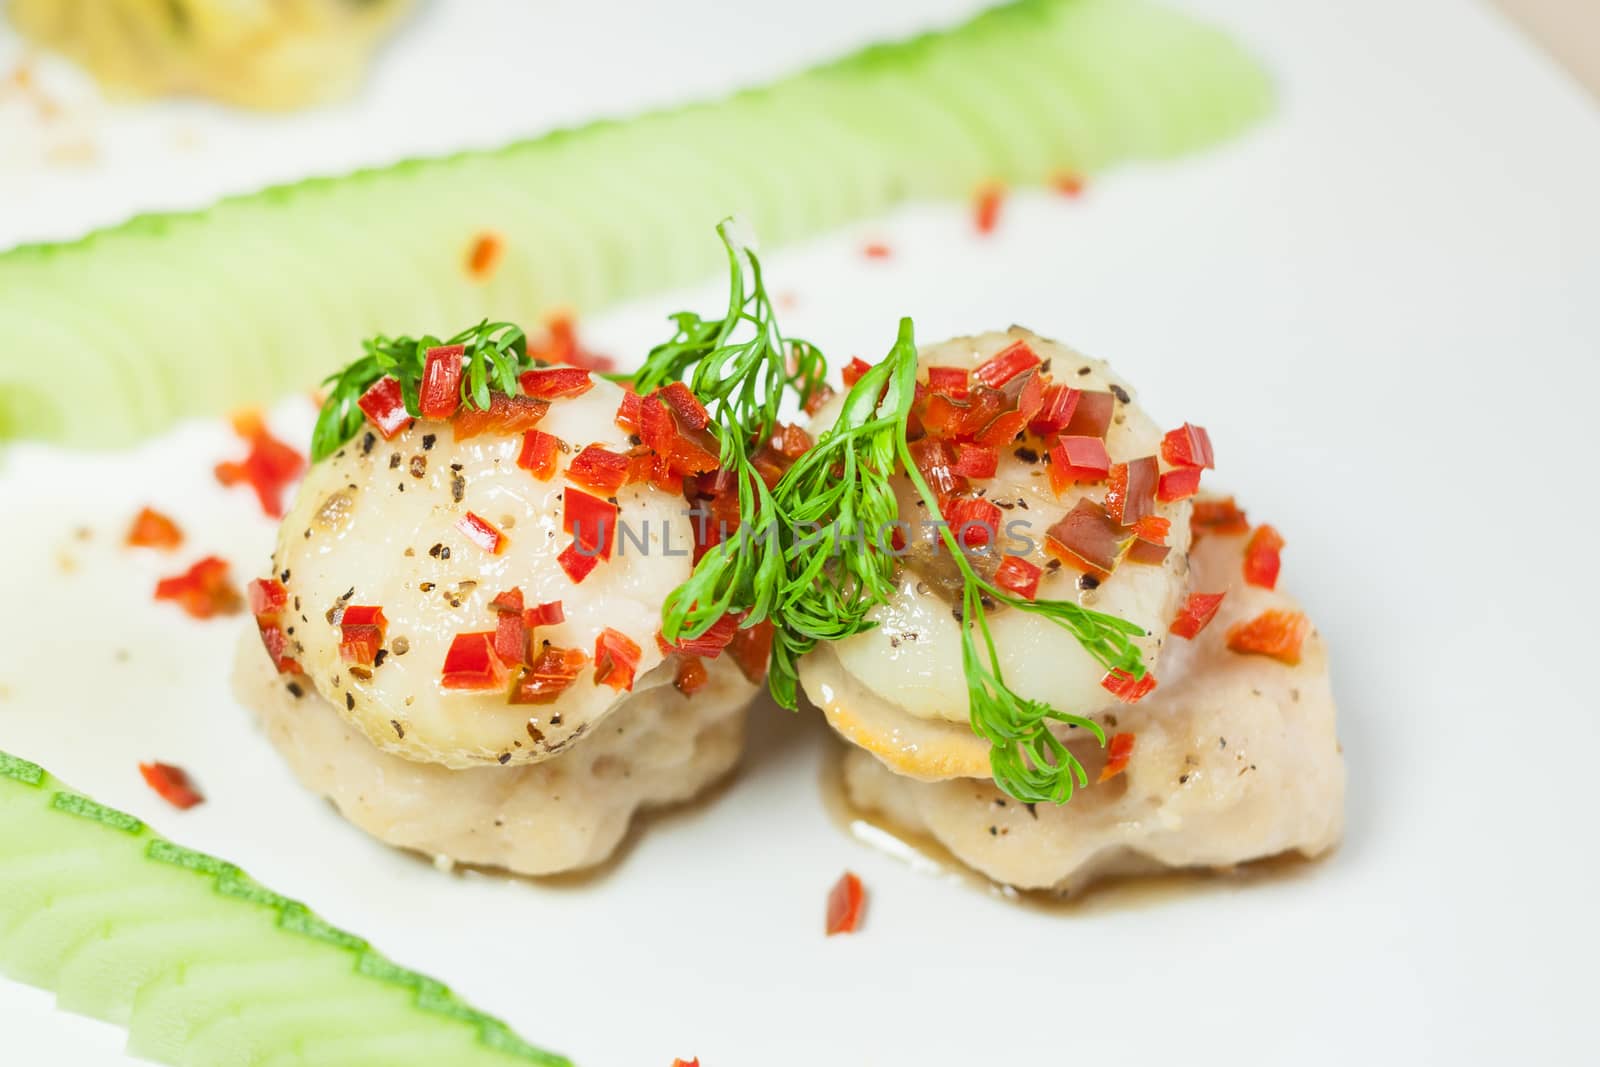 Scallop sprinkled with chili chopped and coriander by nopparats